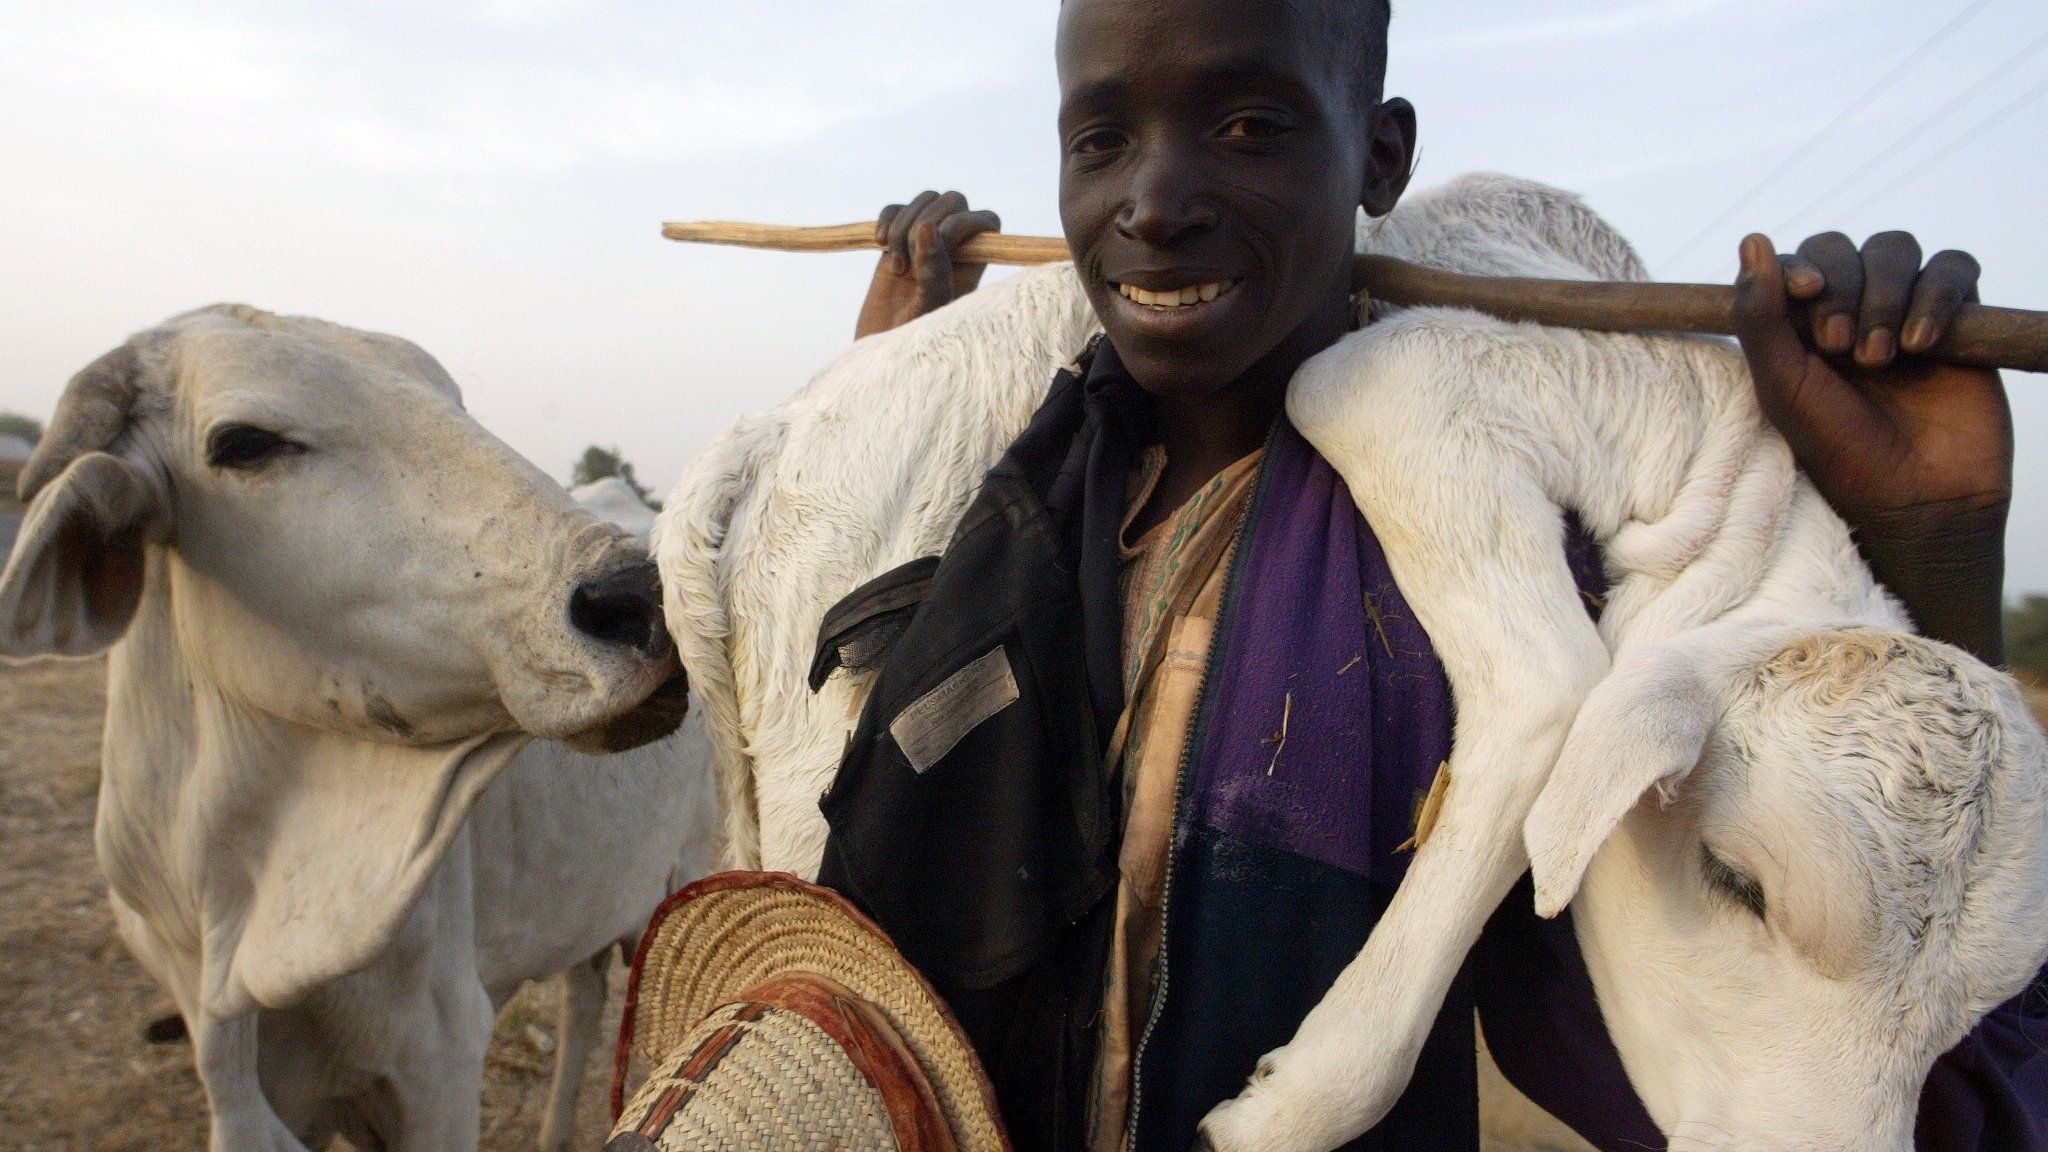 A Fulani herdsman carrying a calf on his shoulder in Kano, northern Nigeria.